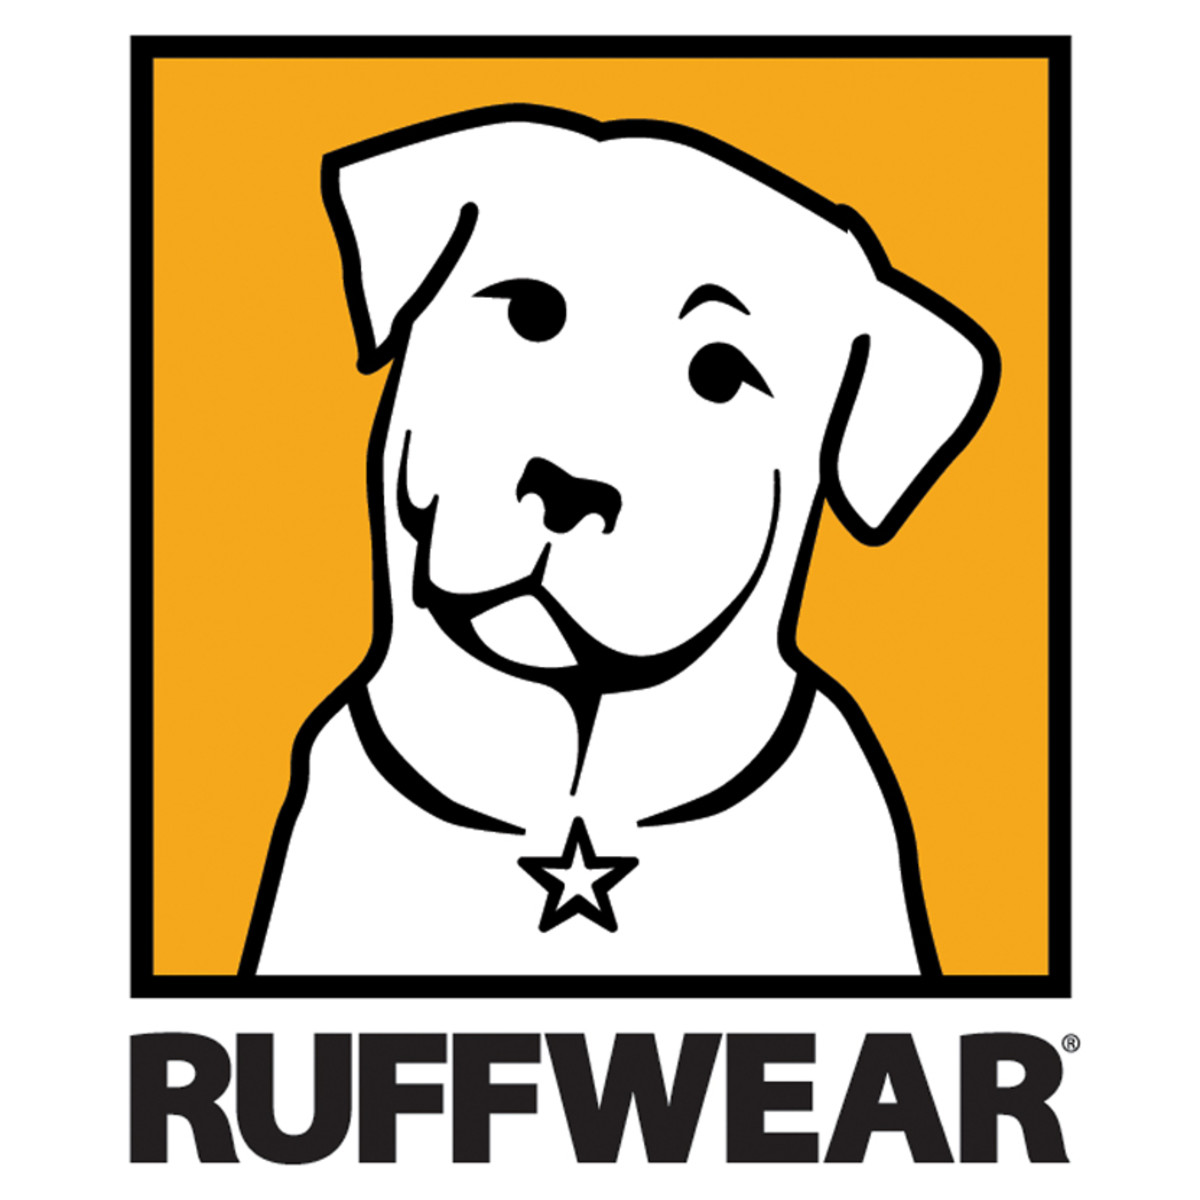 Ruffwear’s Fall Line Release Coincides with 25th Anniversary